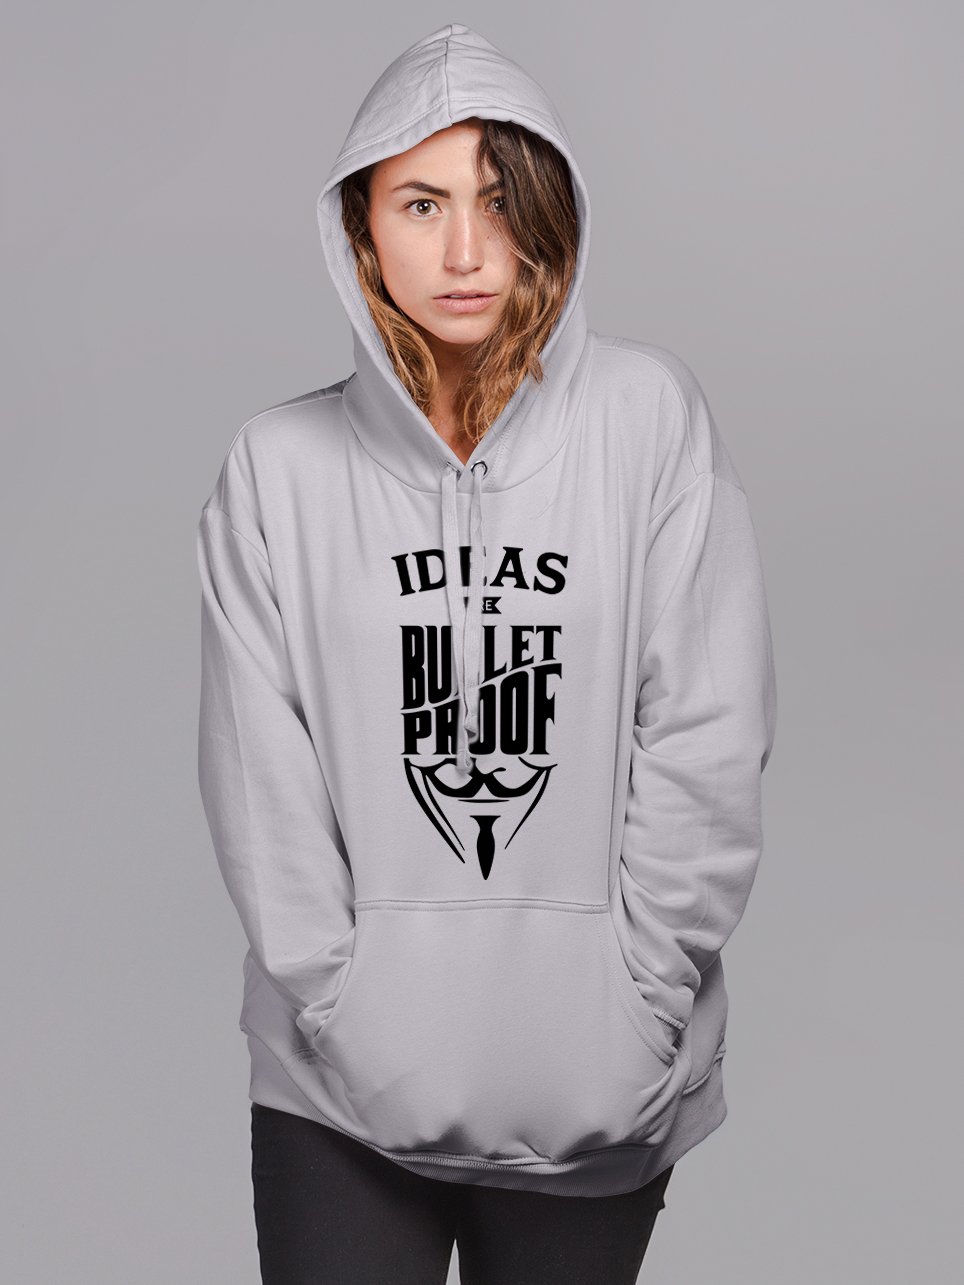 Soft & Fluffy Sweatshirt Hoodies With Quirky Prints - For Men & Women